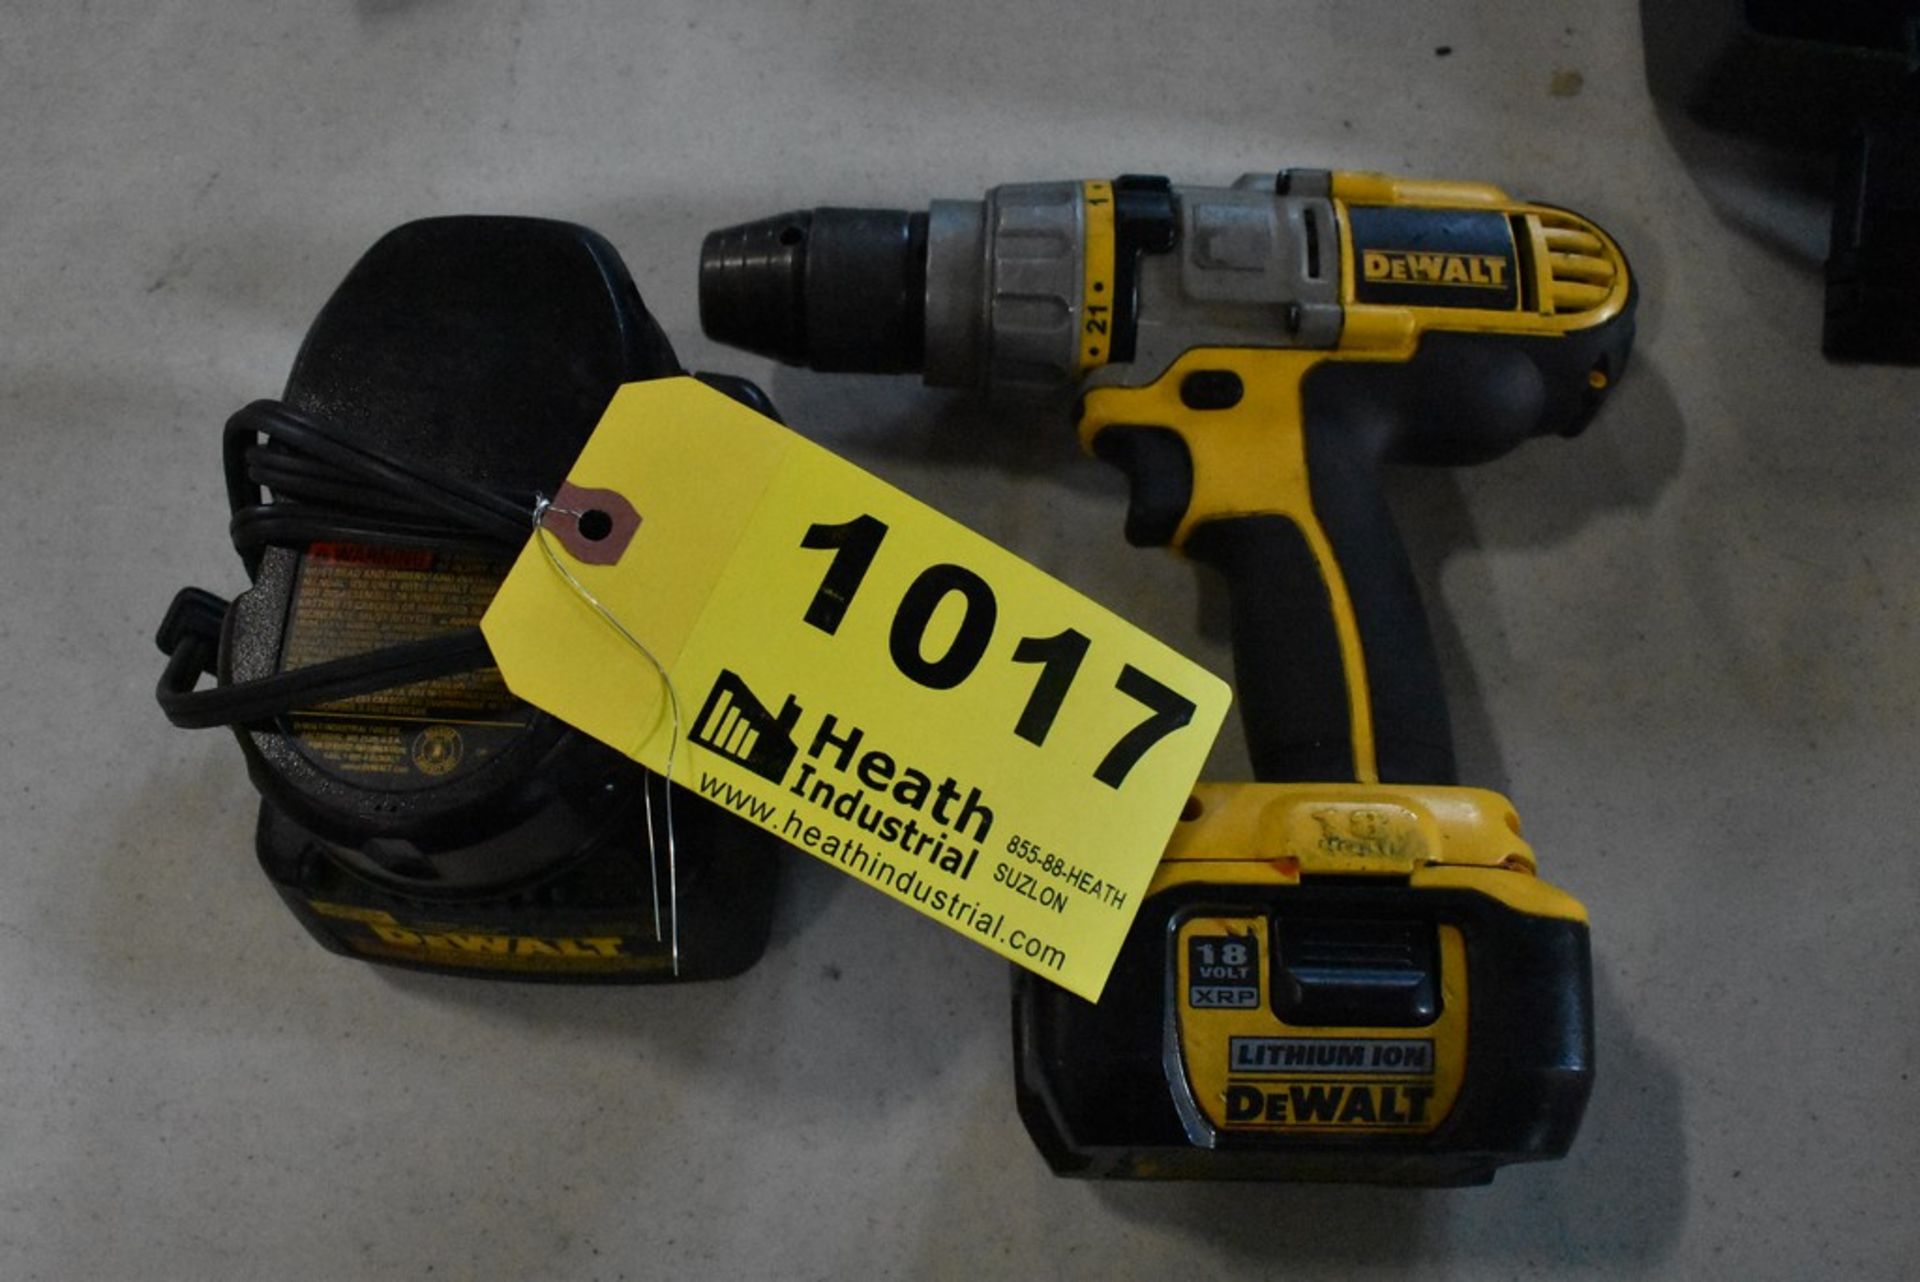 DEWALT MODEL DCD970 XRP 1/2" CORDLESS 18V DRILL / DRIVER, WITH (2) BATTERIES & CHARGER